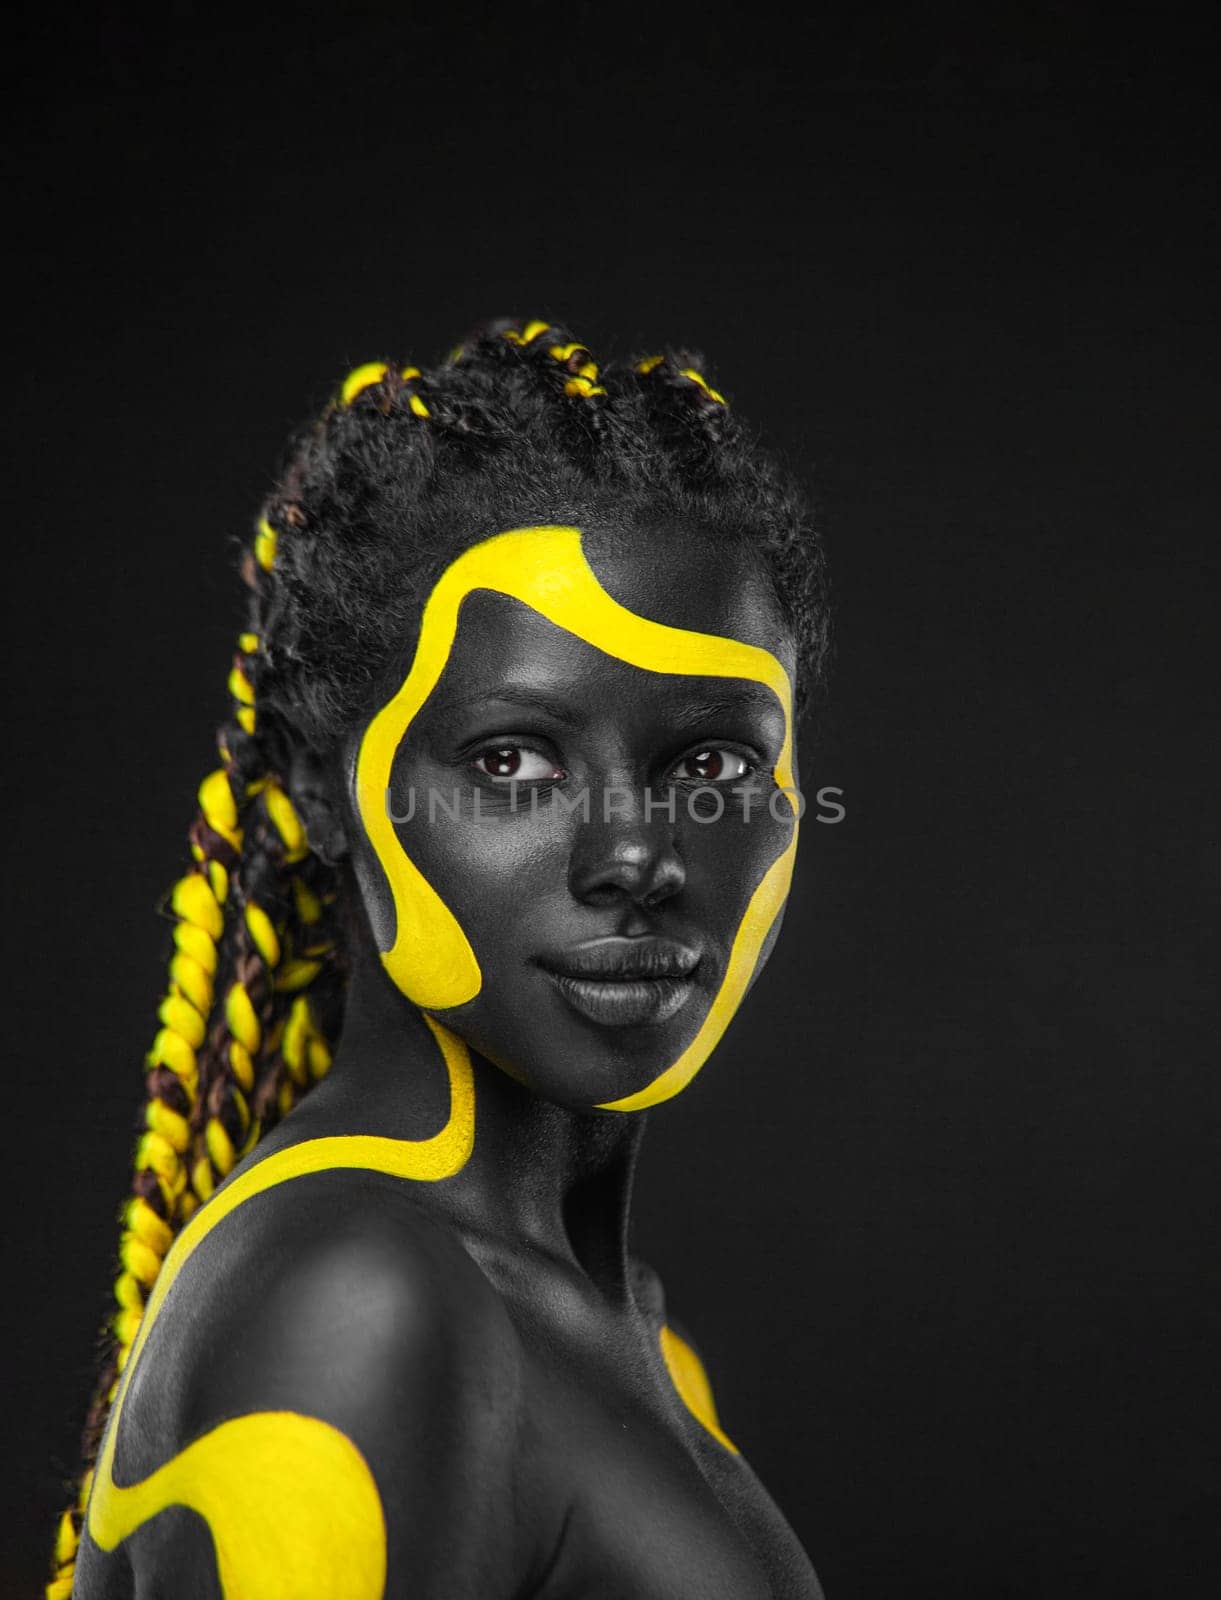 The Art Face. How To Make A Mixtape Cover Design - Download High Resolution Picture with Black and yellow body paint on african woman for your Music Song. Create Album Template with Creative Image. by MikeOrlov